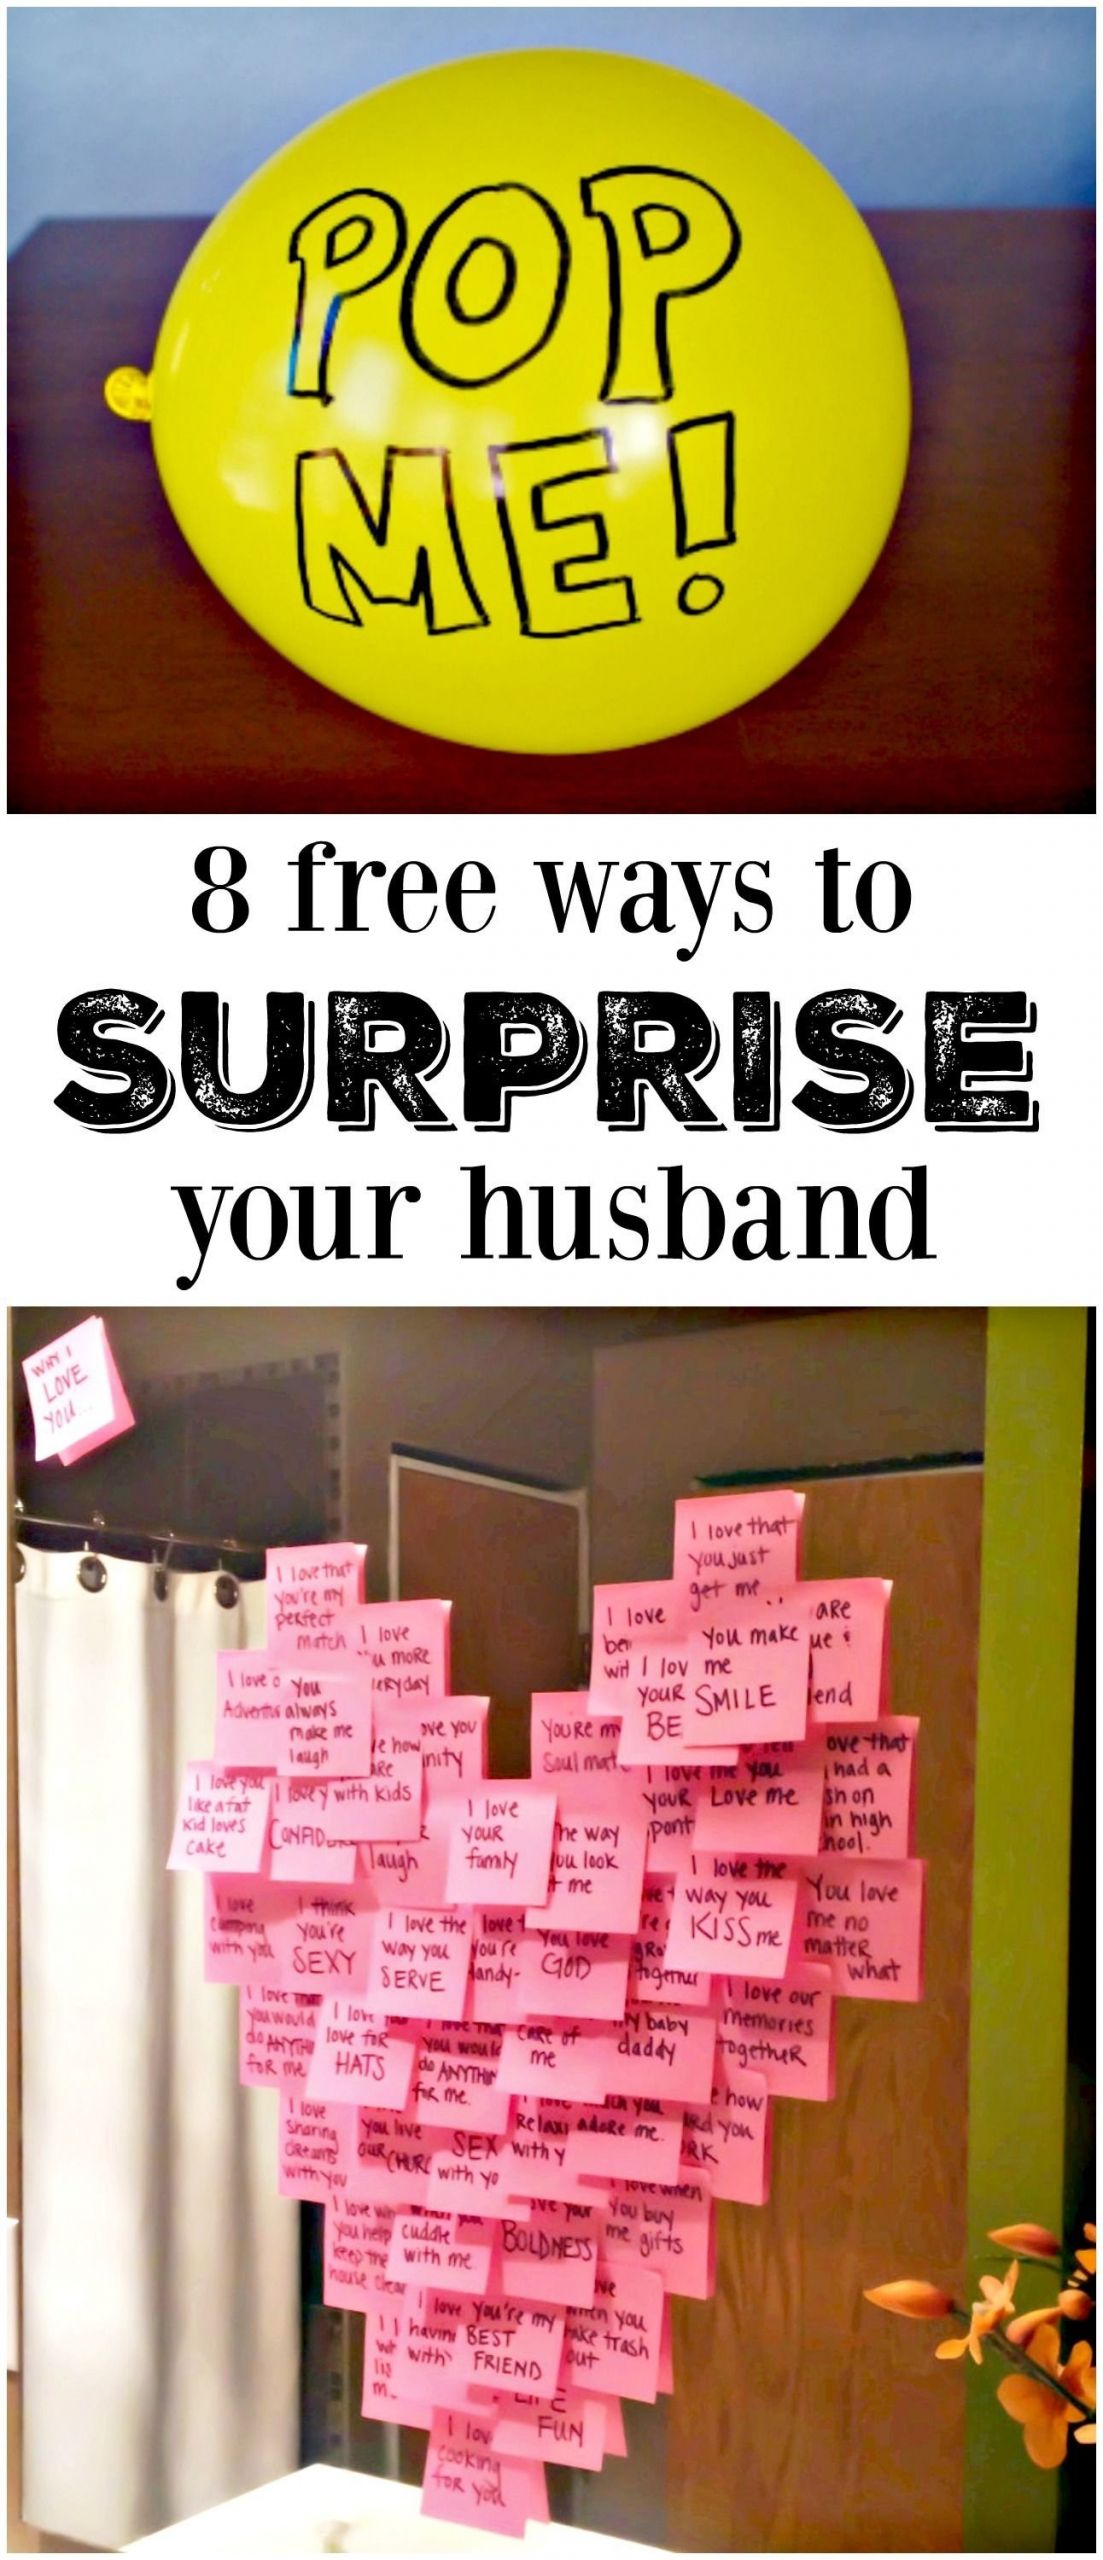 Ideas For Husbands Birthday Gift
 10 Amazing Creative Birthday Ideas For Husband 2019